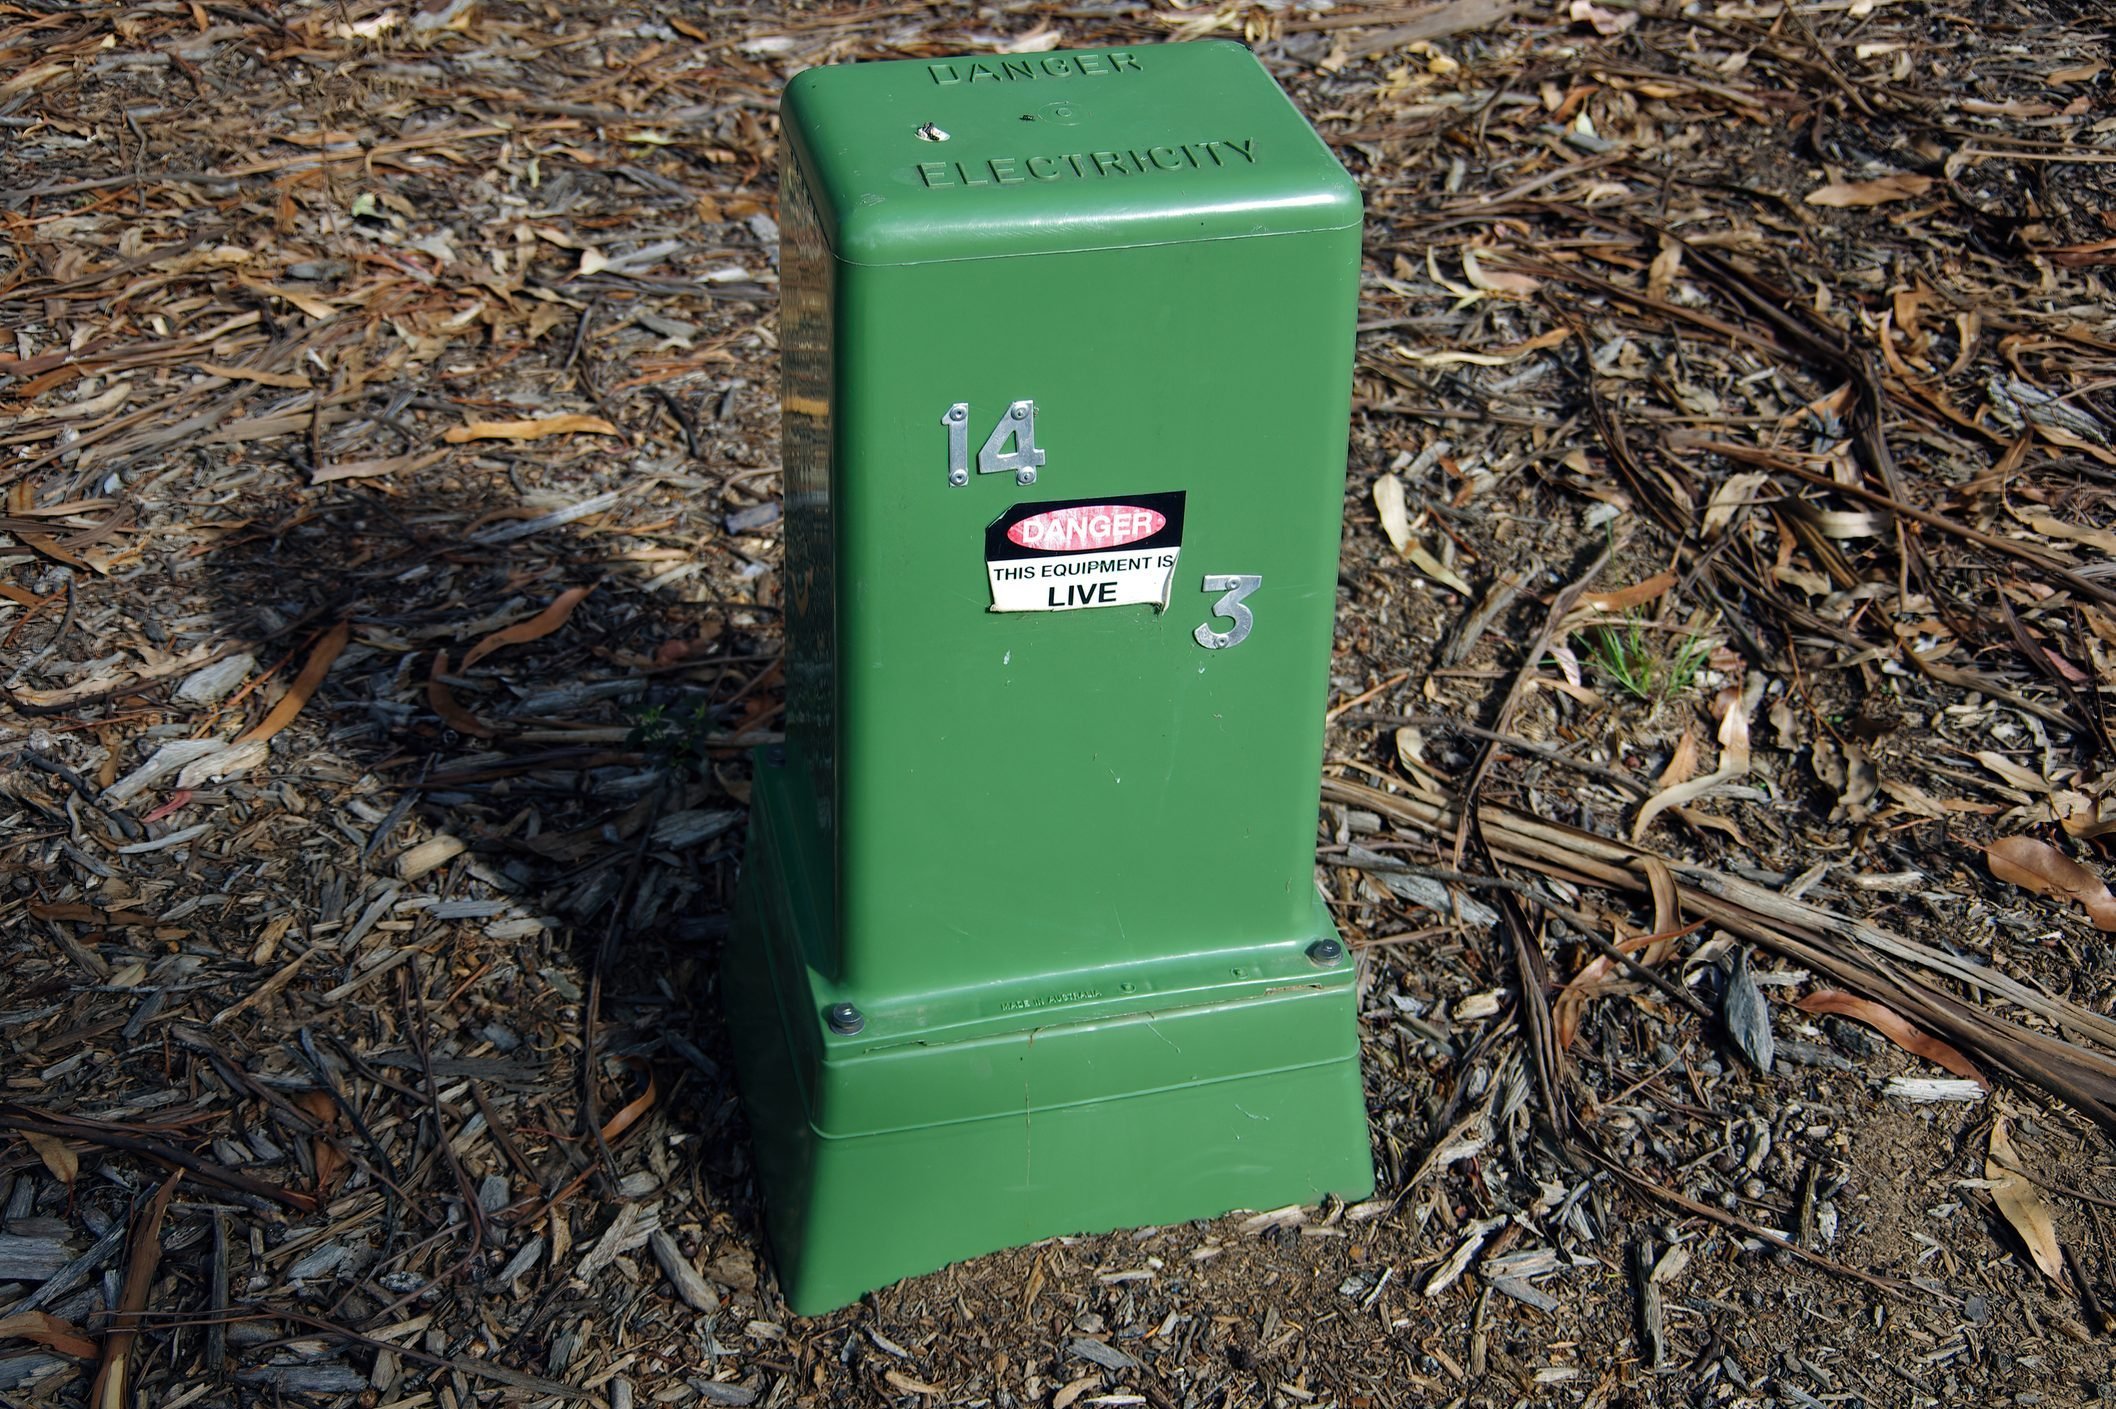 What To Know About Electrical Transformer Boxes In Your Yard